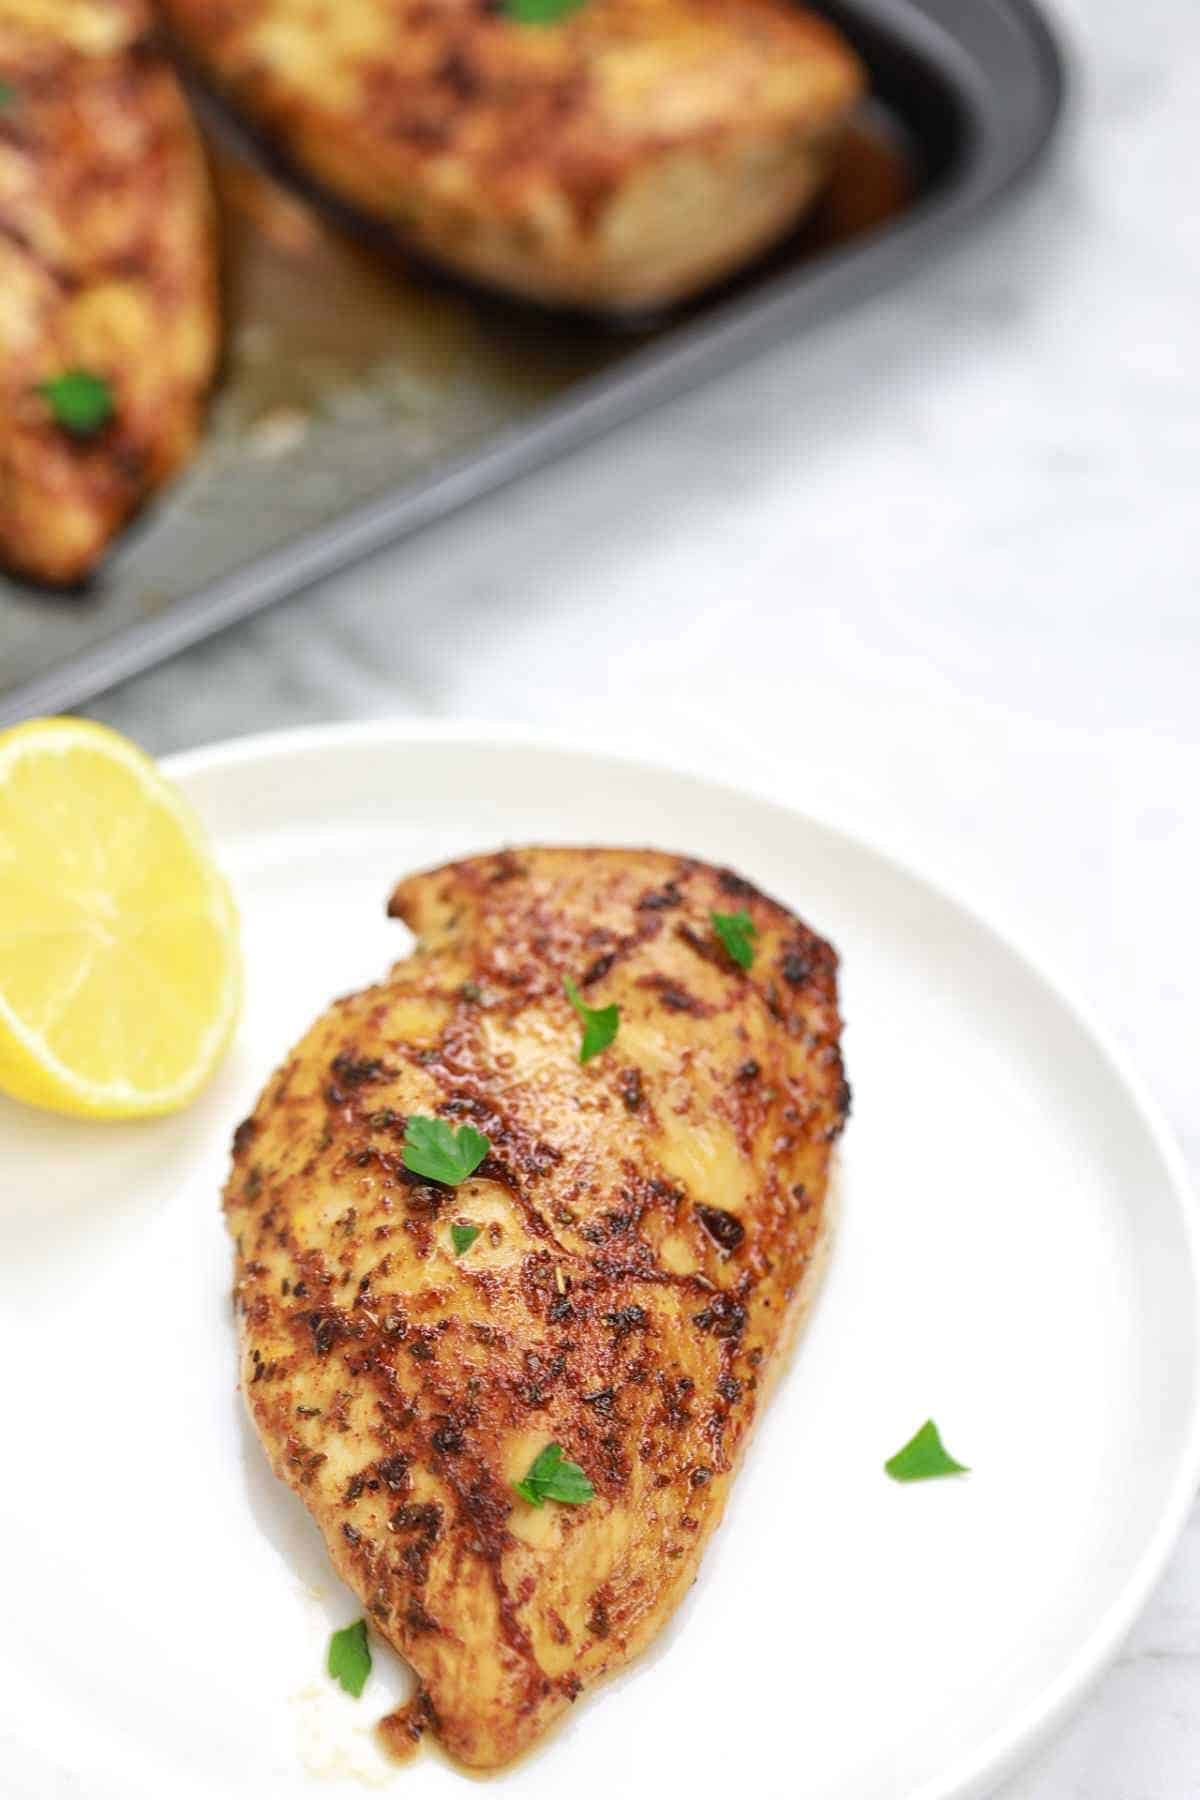 cooked marinated chicken breast.